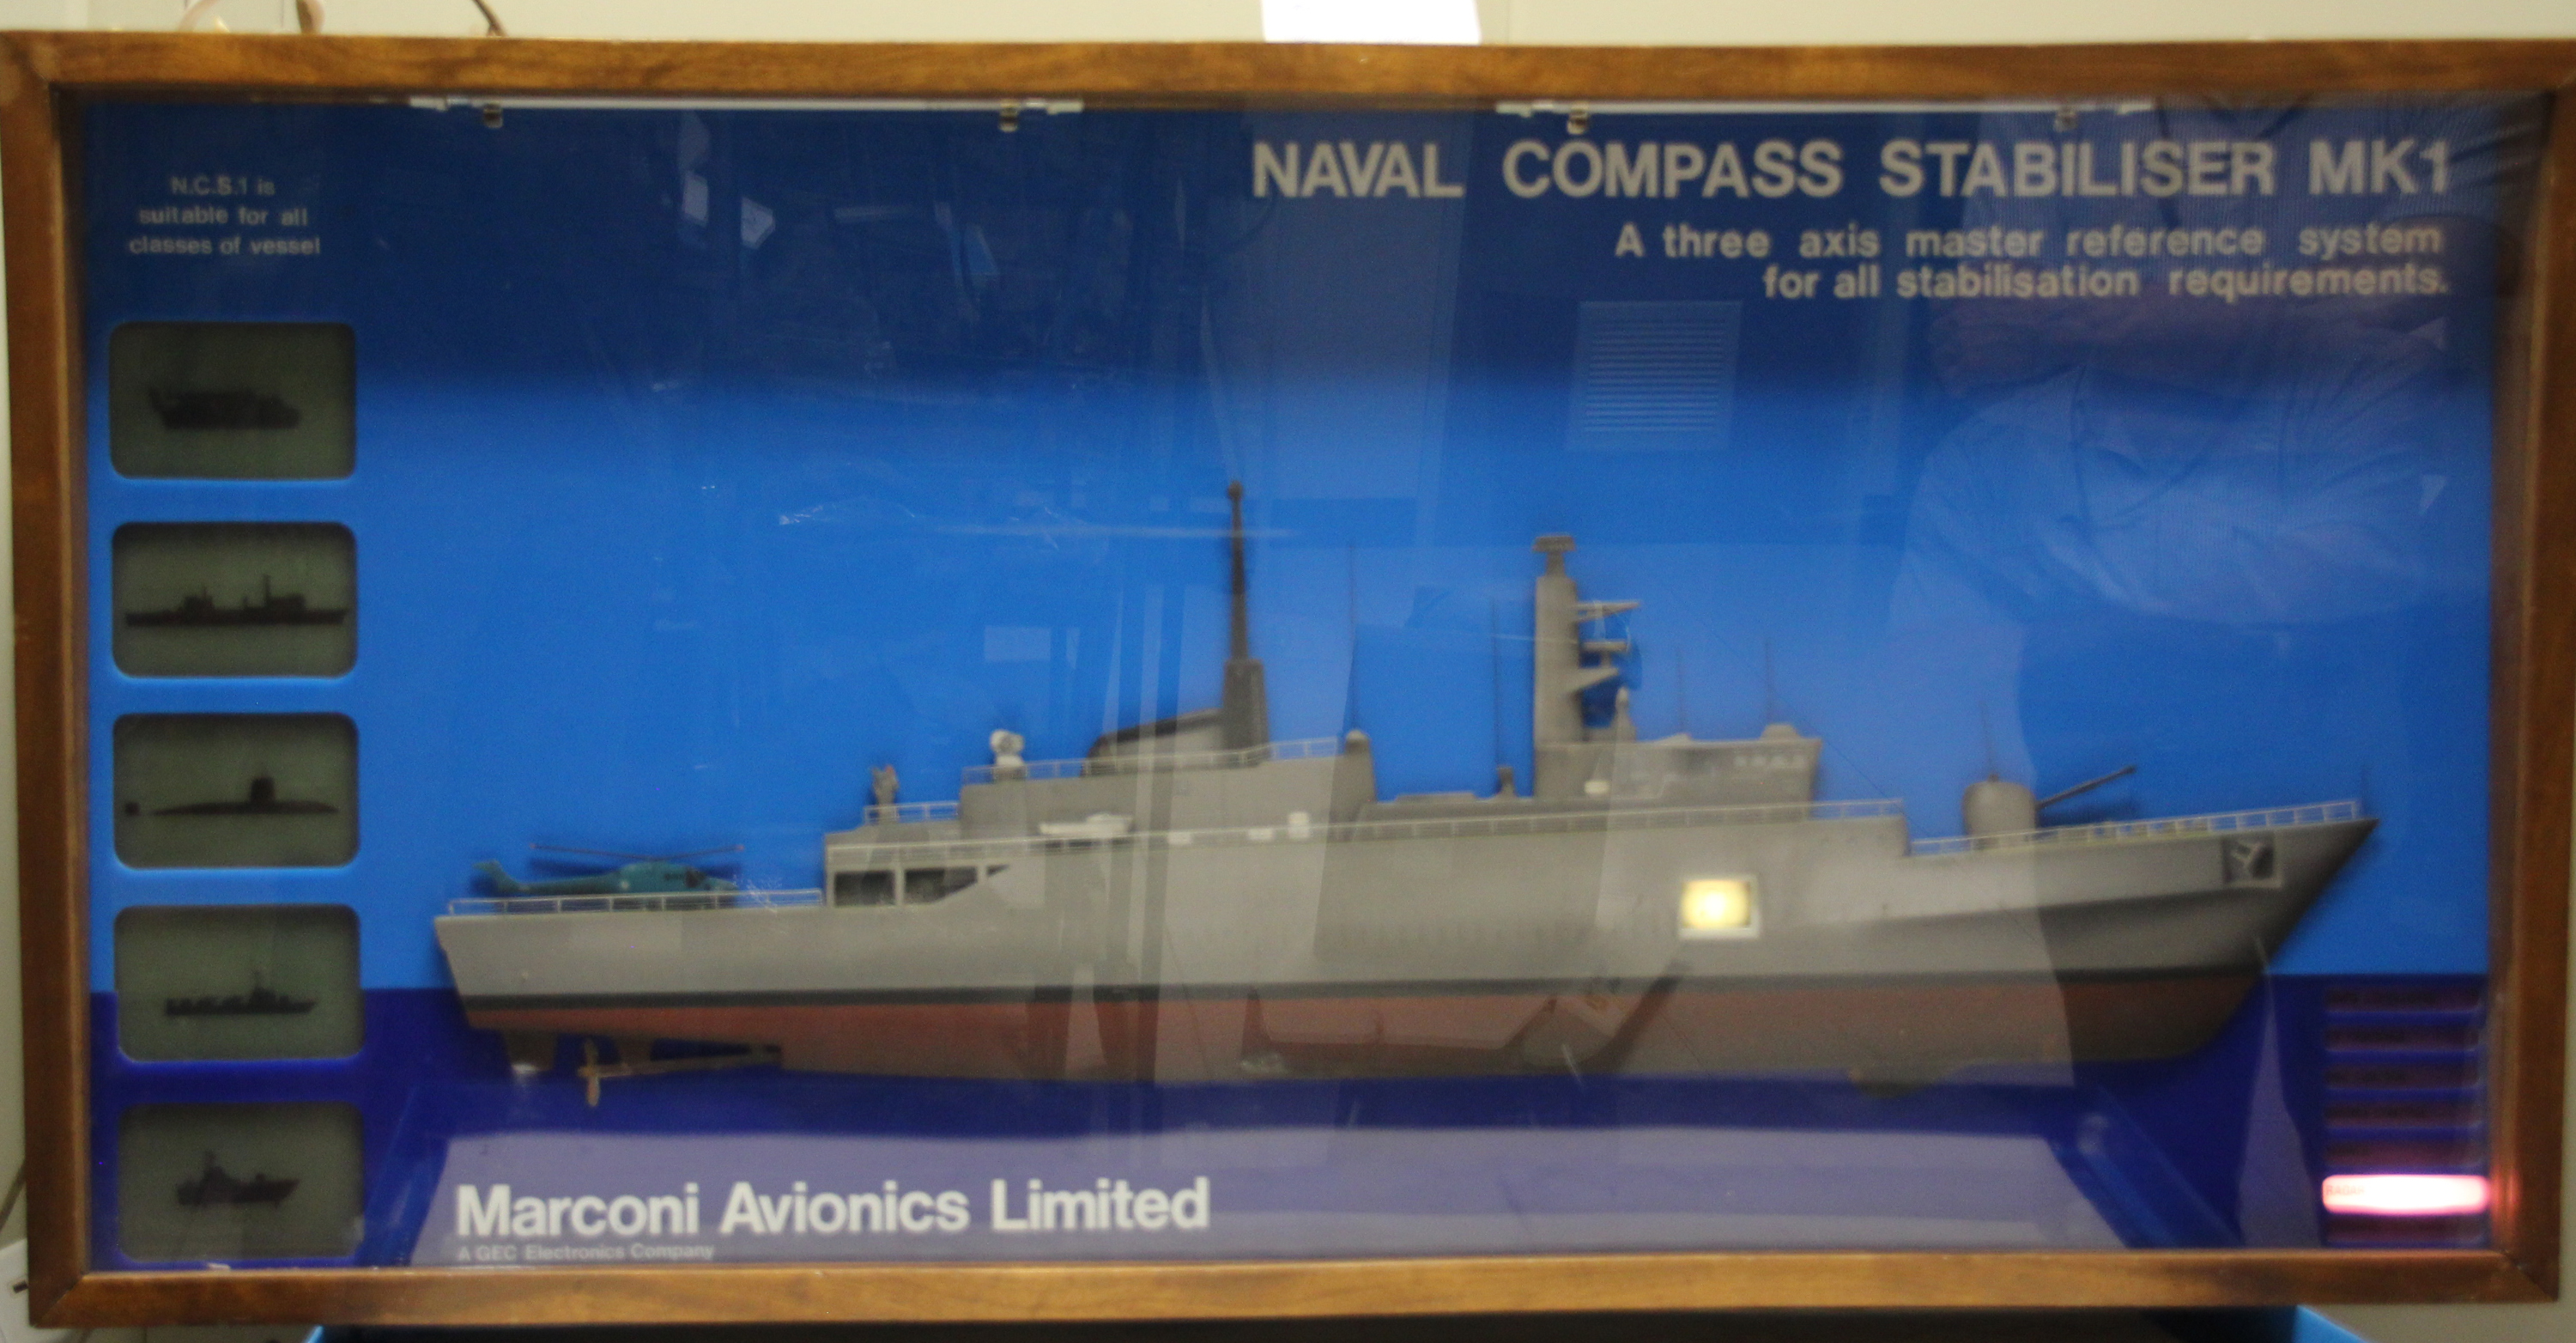 Automaton of Ship demonstrating NCS1 system